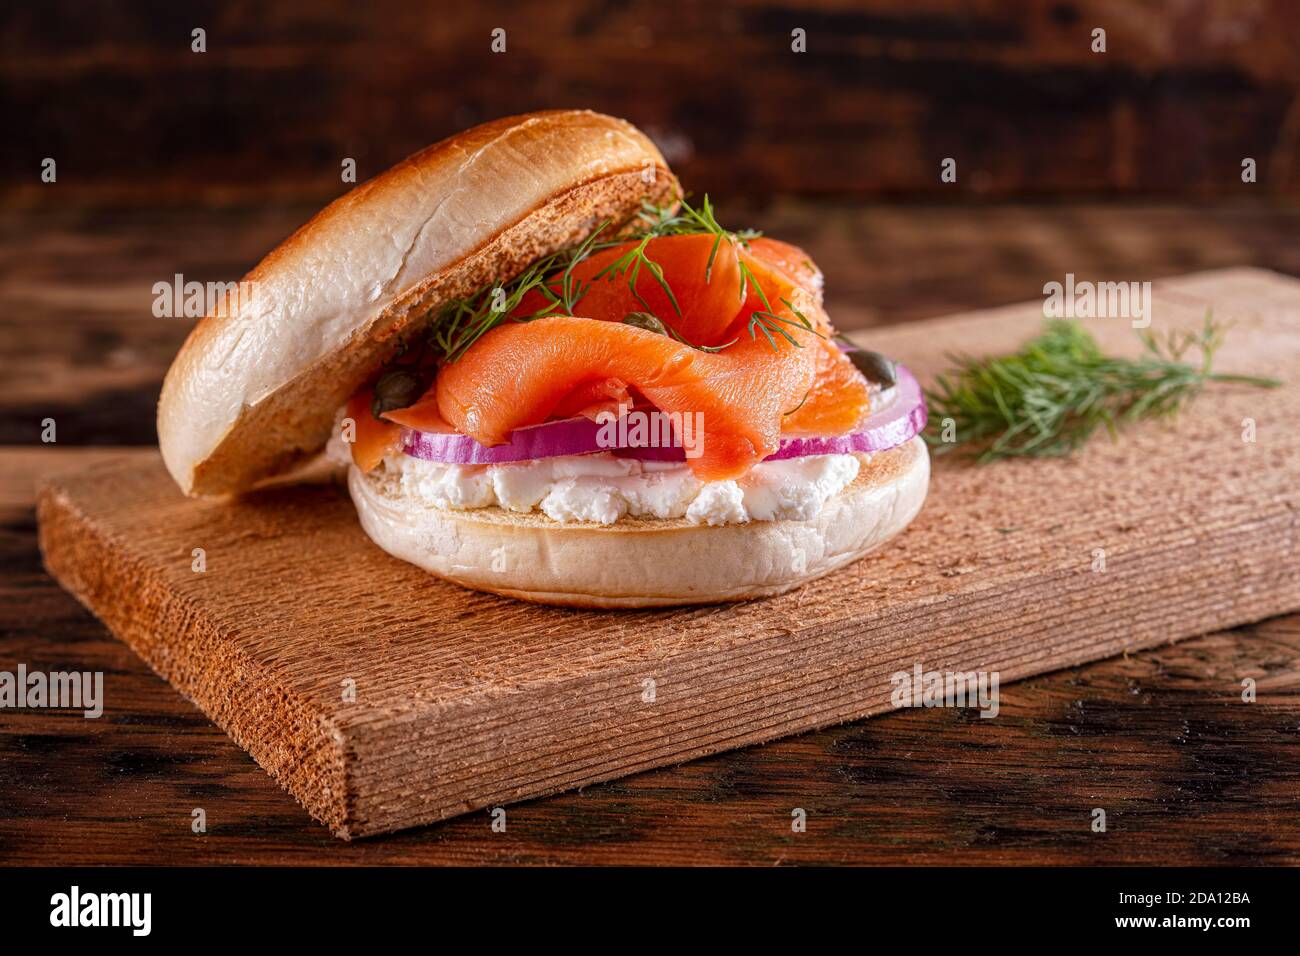 A delicious toasted plain bagel with smoked salmon, cream cheese, red onion, capers and dill. Stock Photo